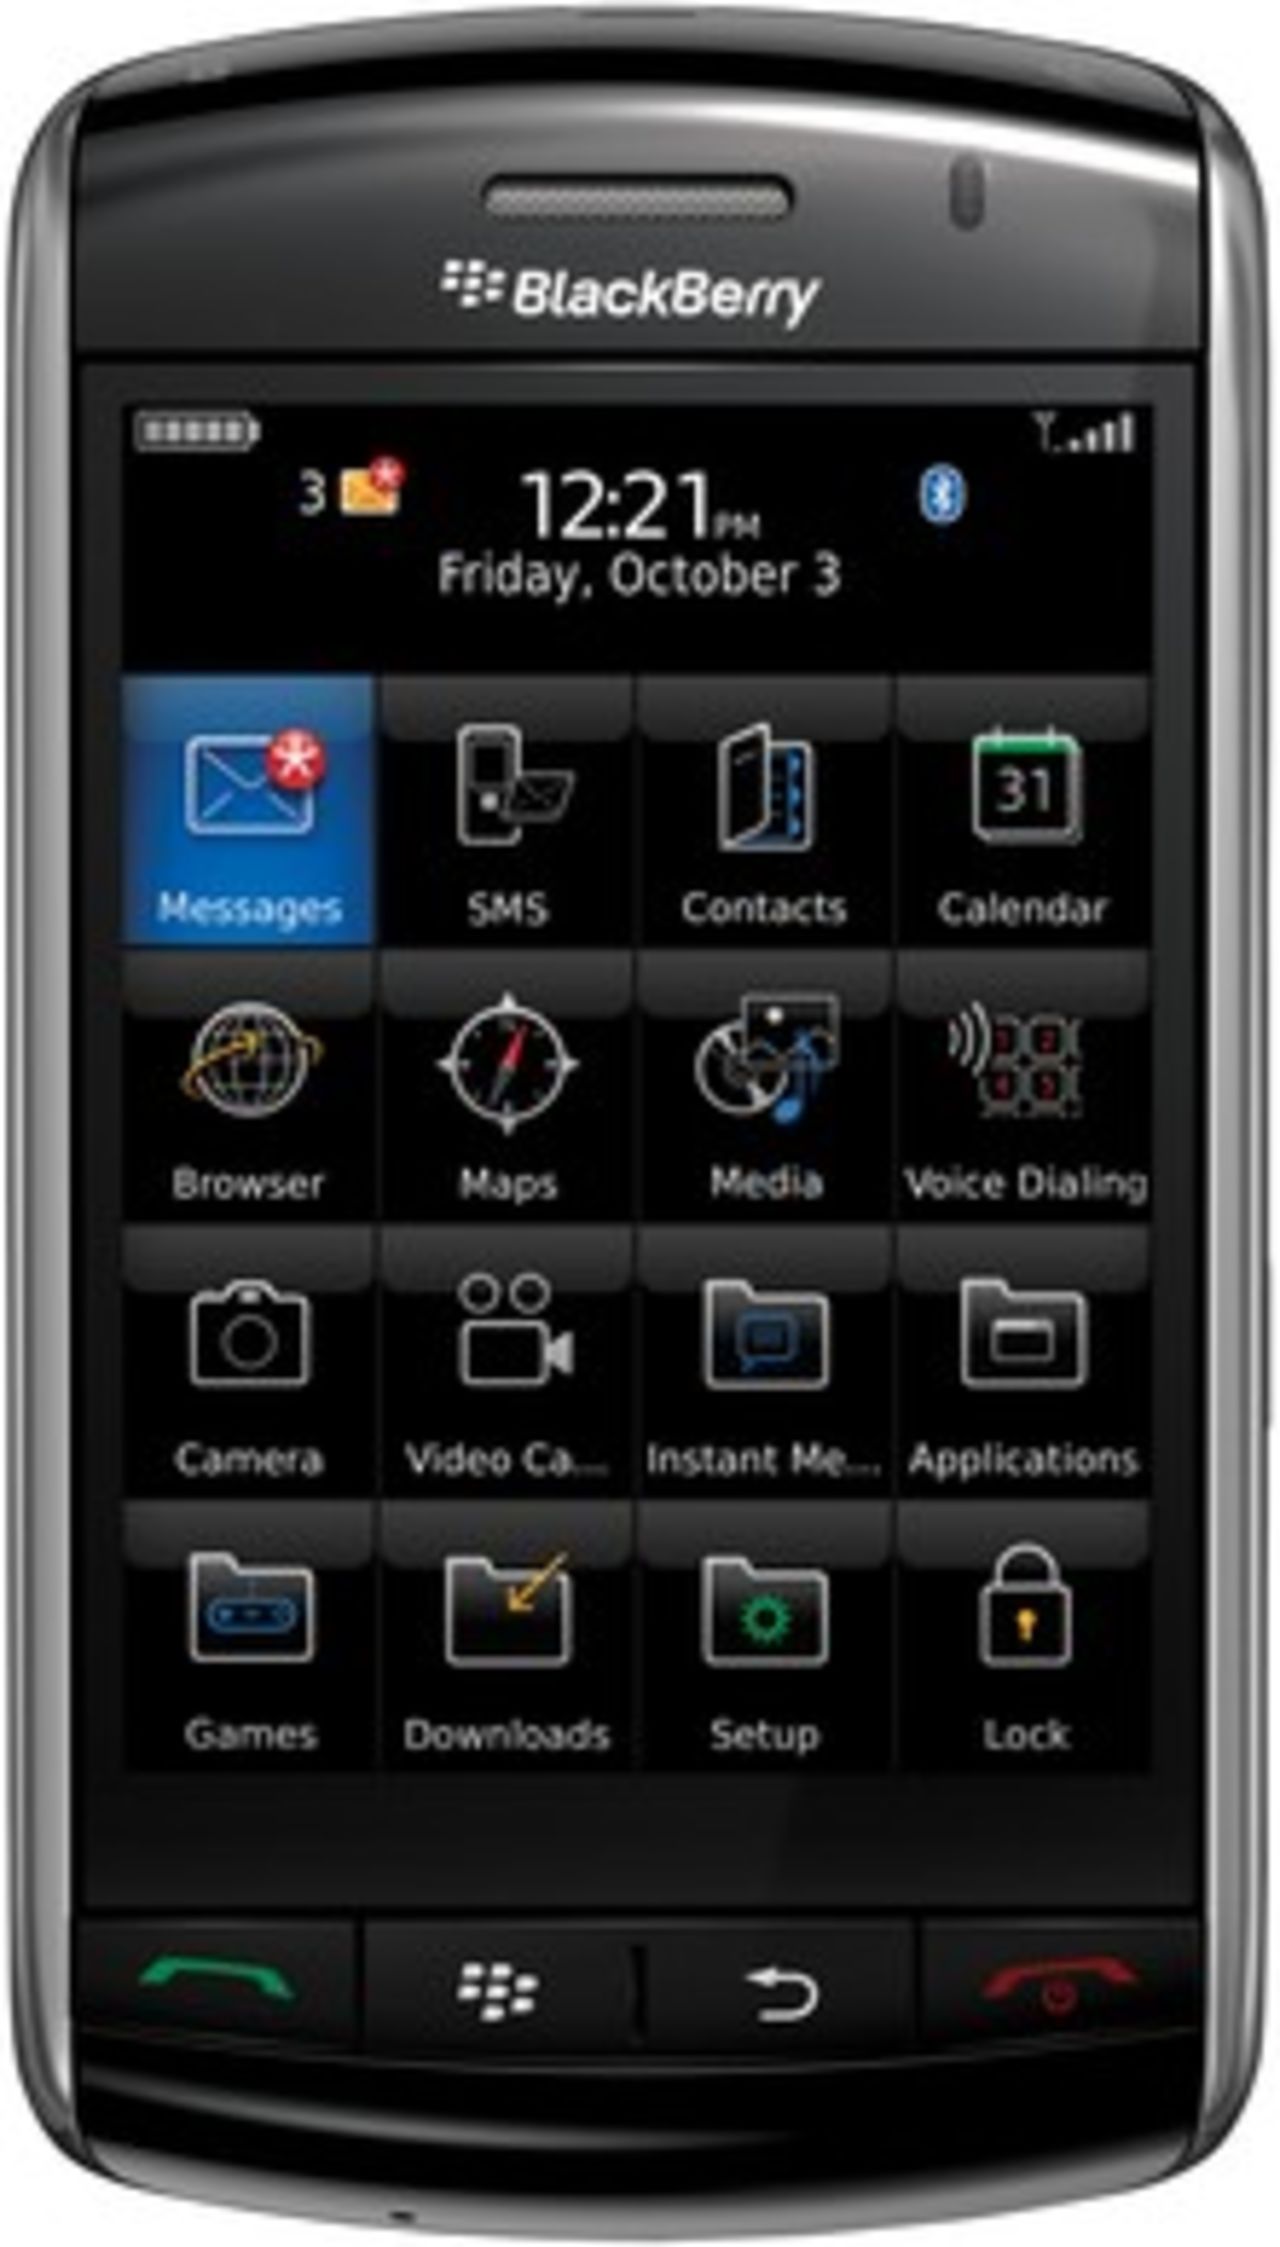 The Storm was BlackBerry's first all-touchscreen device, released in 2010 as a belated attempt to catch up with Apple. The phone got mixed reviews, and many customers found its touchscreen difficult to operate.